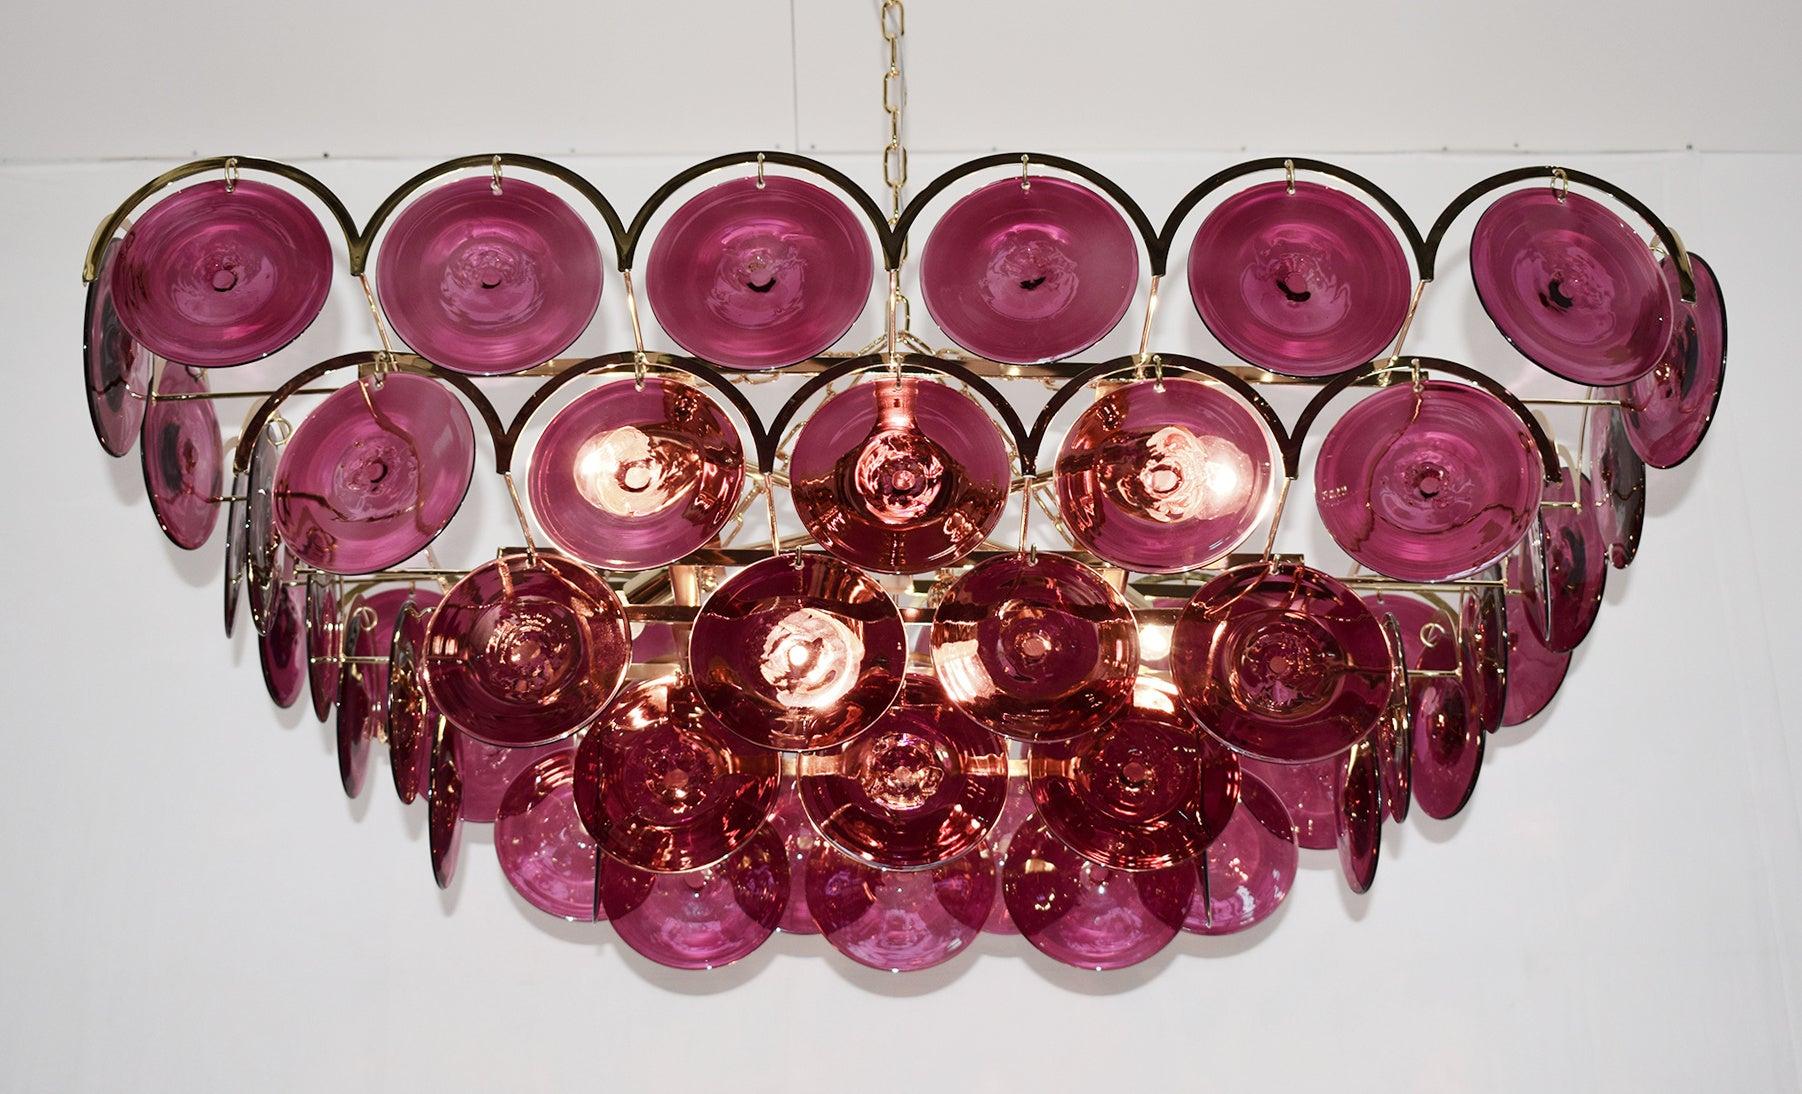 Italian chandelier with burgundy colored hand blown Murano glass discs mounted on 24-karat gold-plated metal frame with decorative arch details, by Fabio Ltd, made in Italy
6 lights / E26 or E27 type / max 60W each
Measures: Length 37.5 inches,